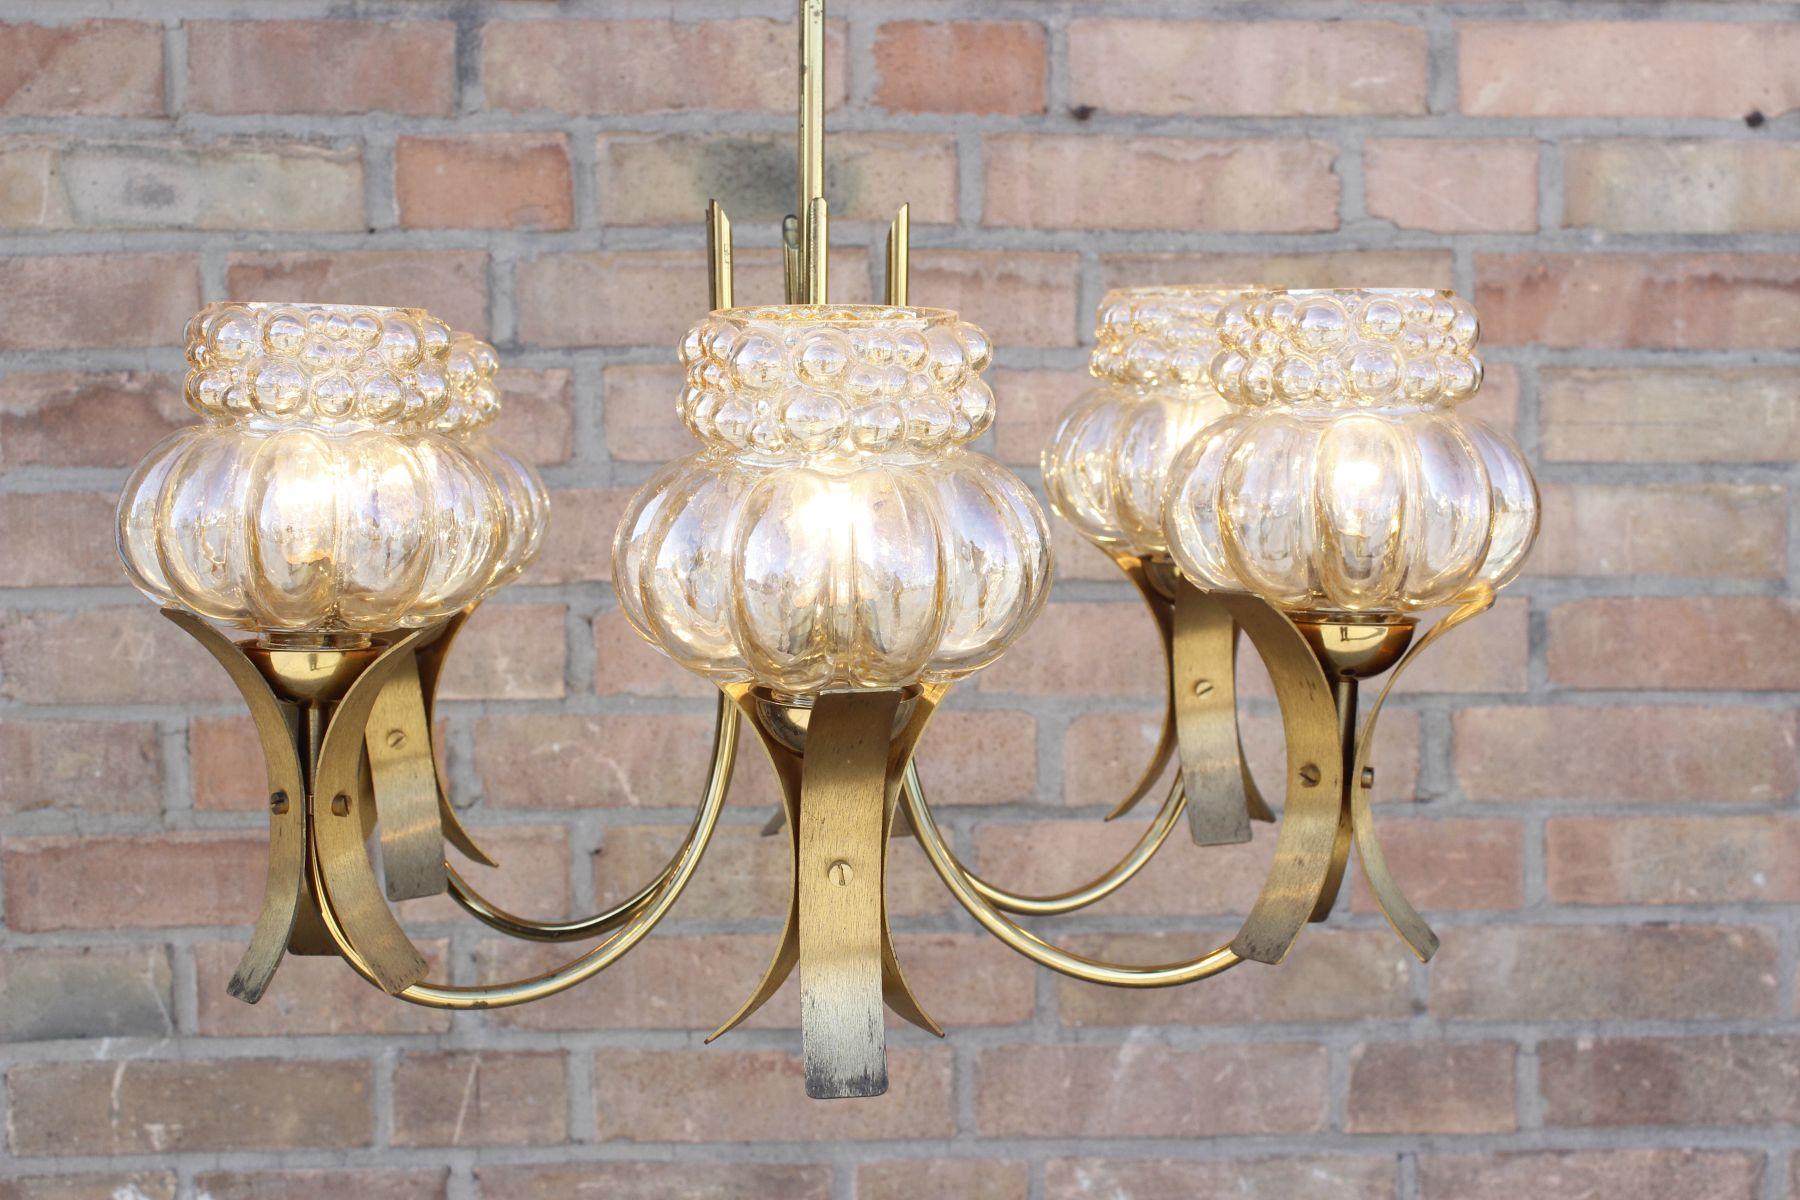 6 Arms chandelier in brass and molded glass, the glass shades are very reminescent of the Bubble series designed by Helena Tynell for Limburg, with a golden tint to them. 

The chandelier is in great condition and great working order, there is no